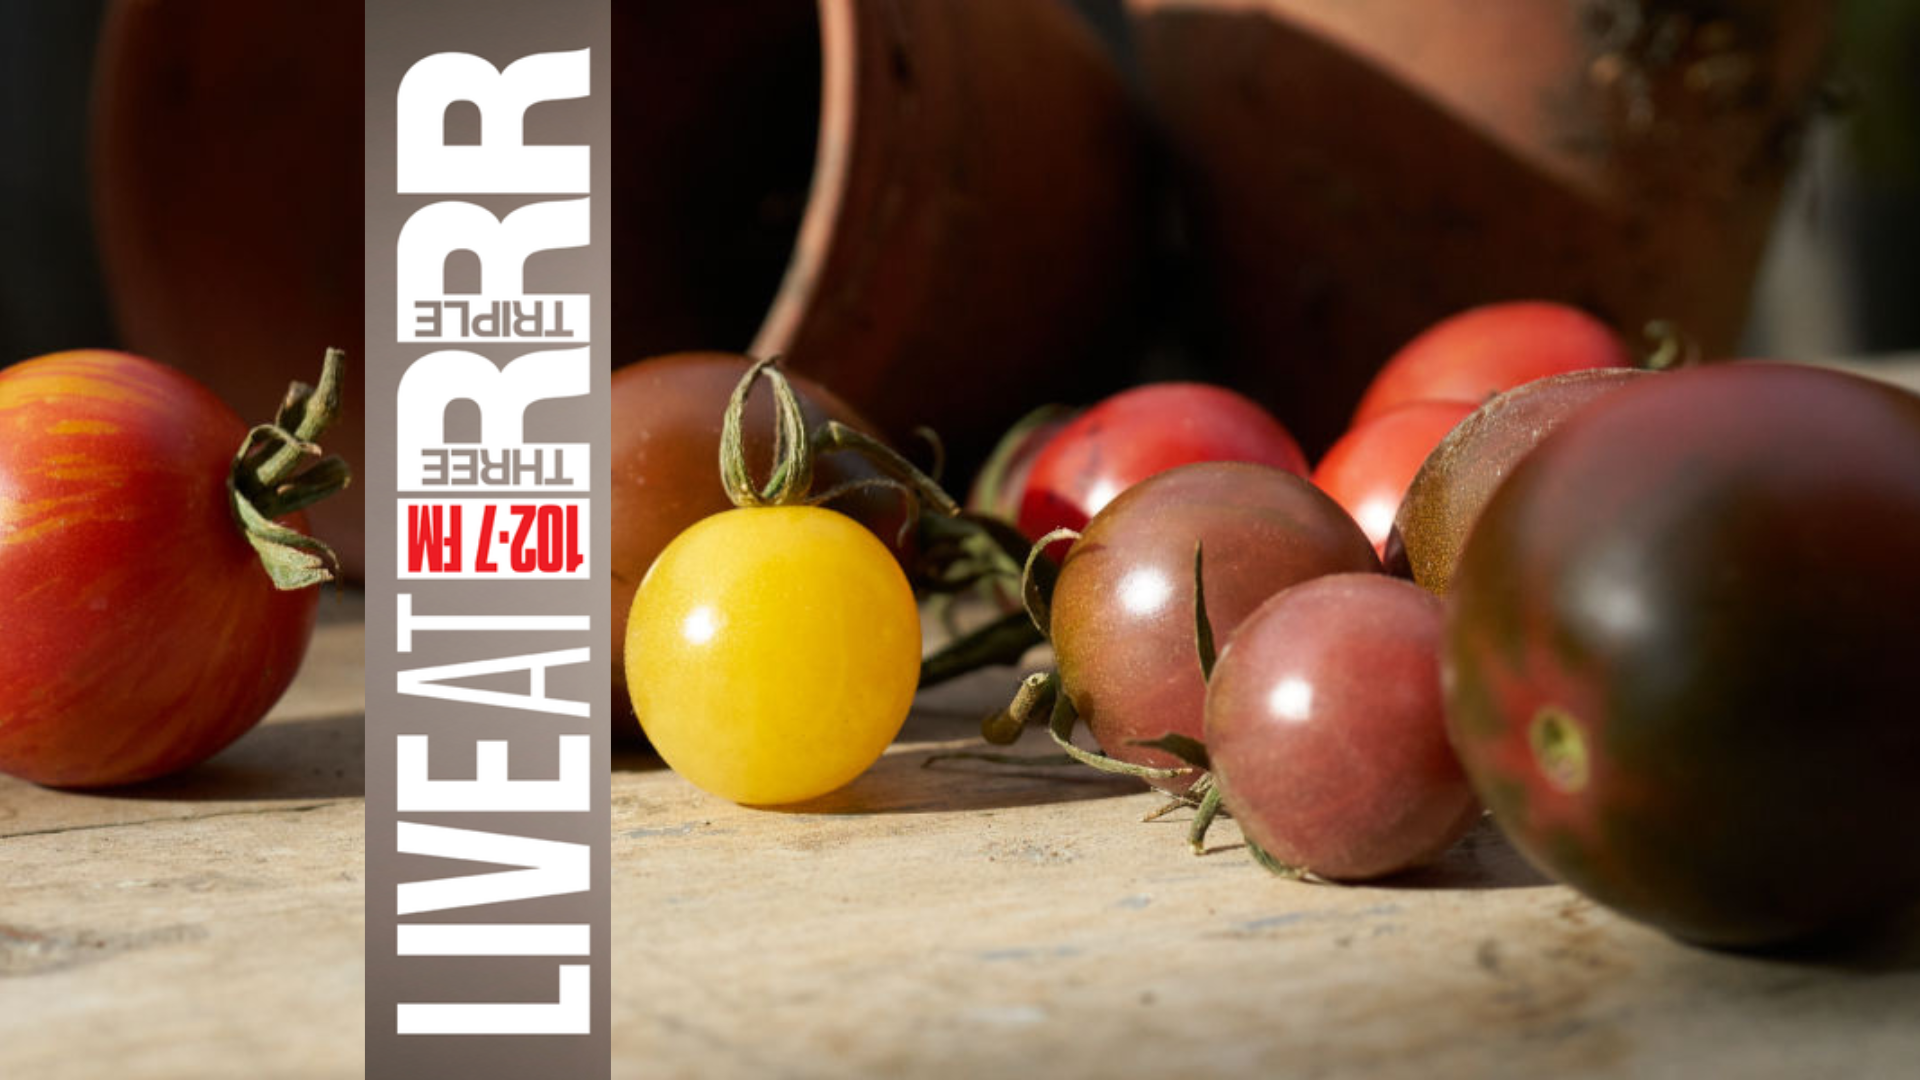 3RRR radio talk on Cup Day Tomato Growing